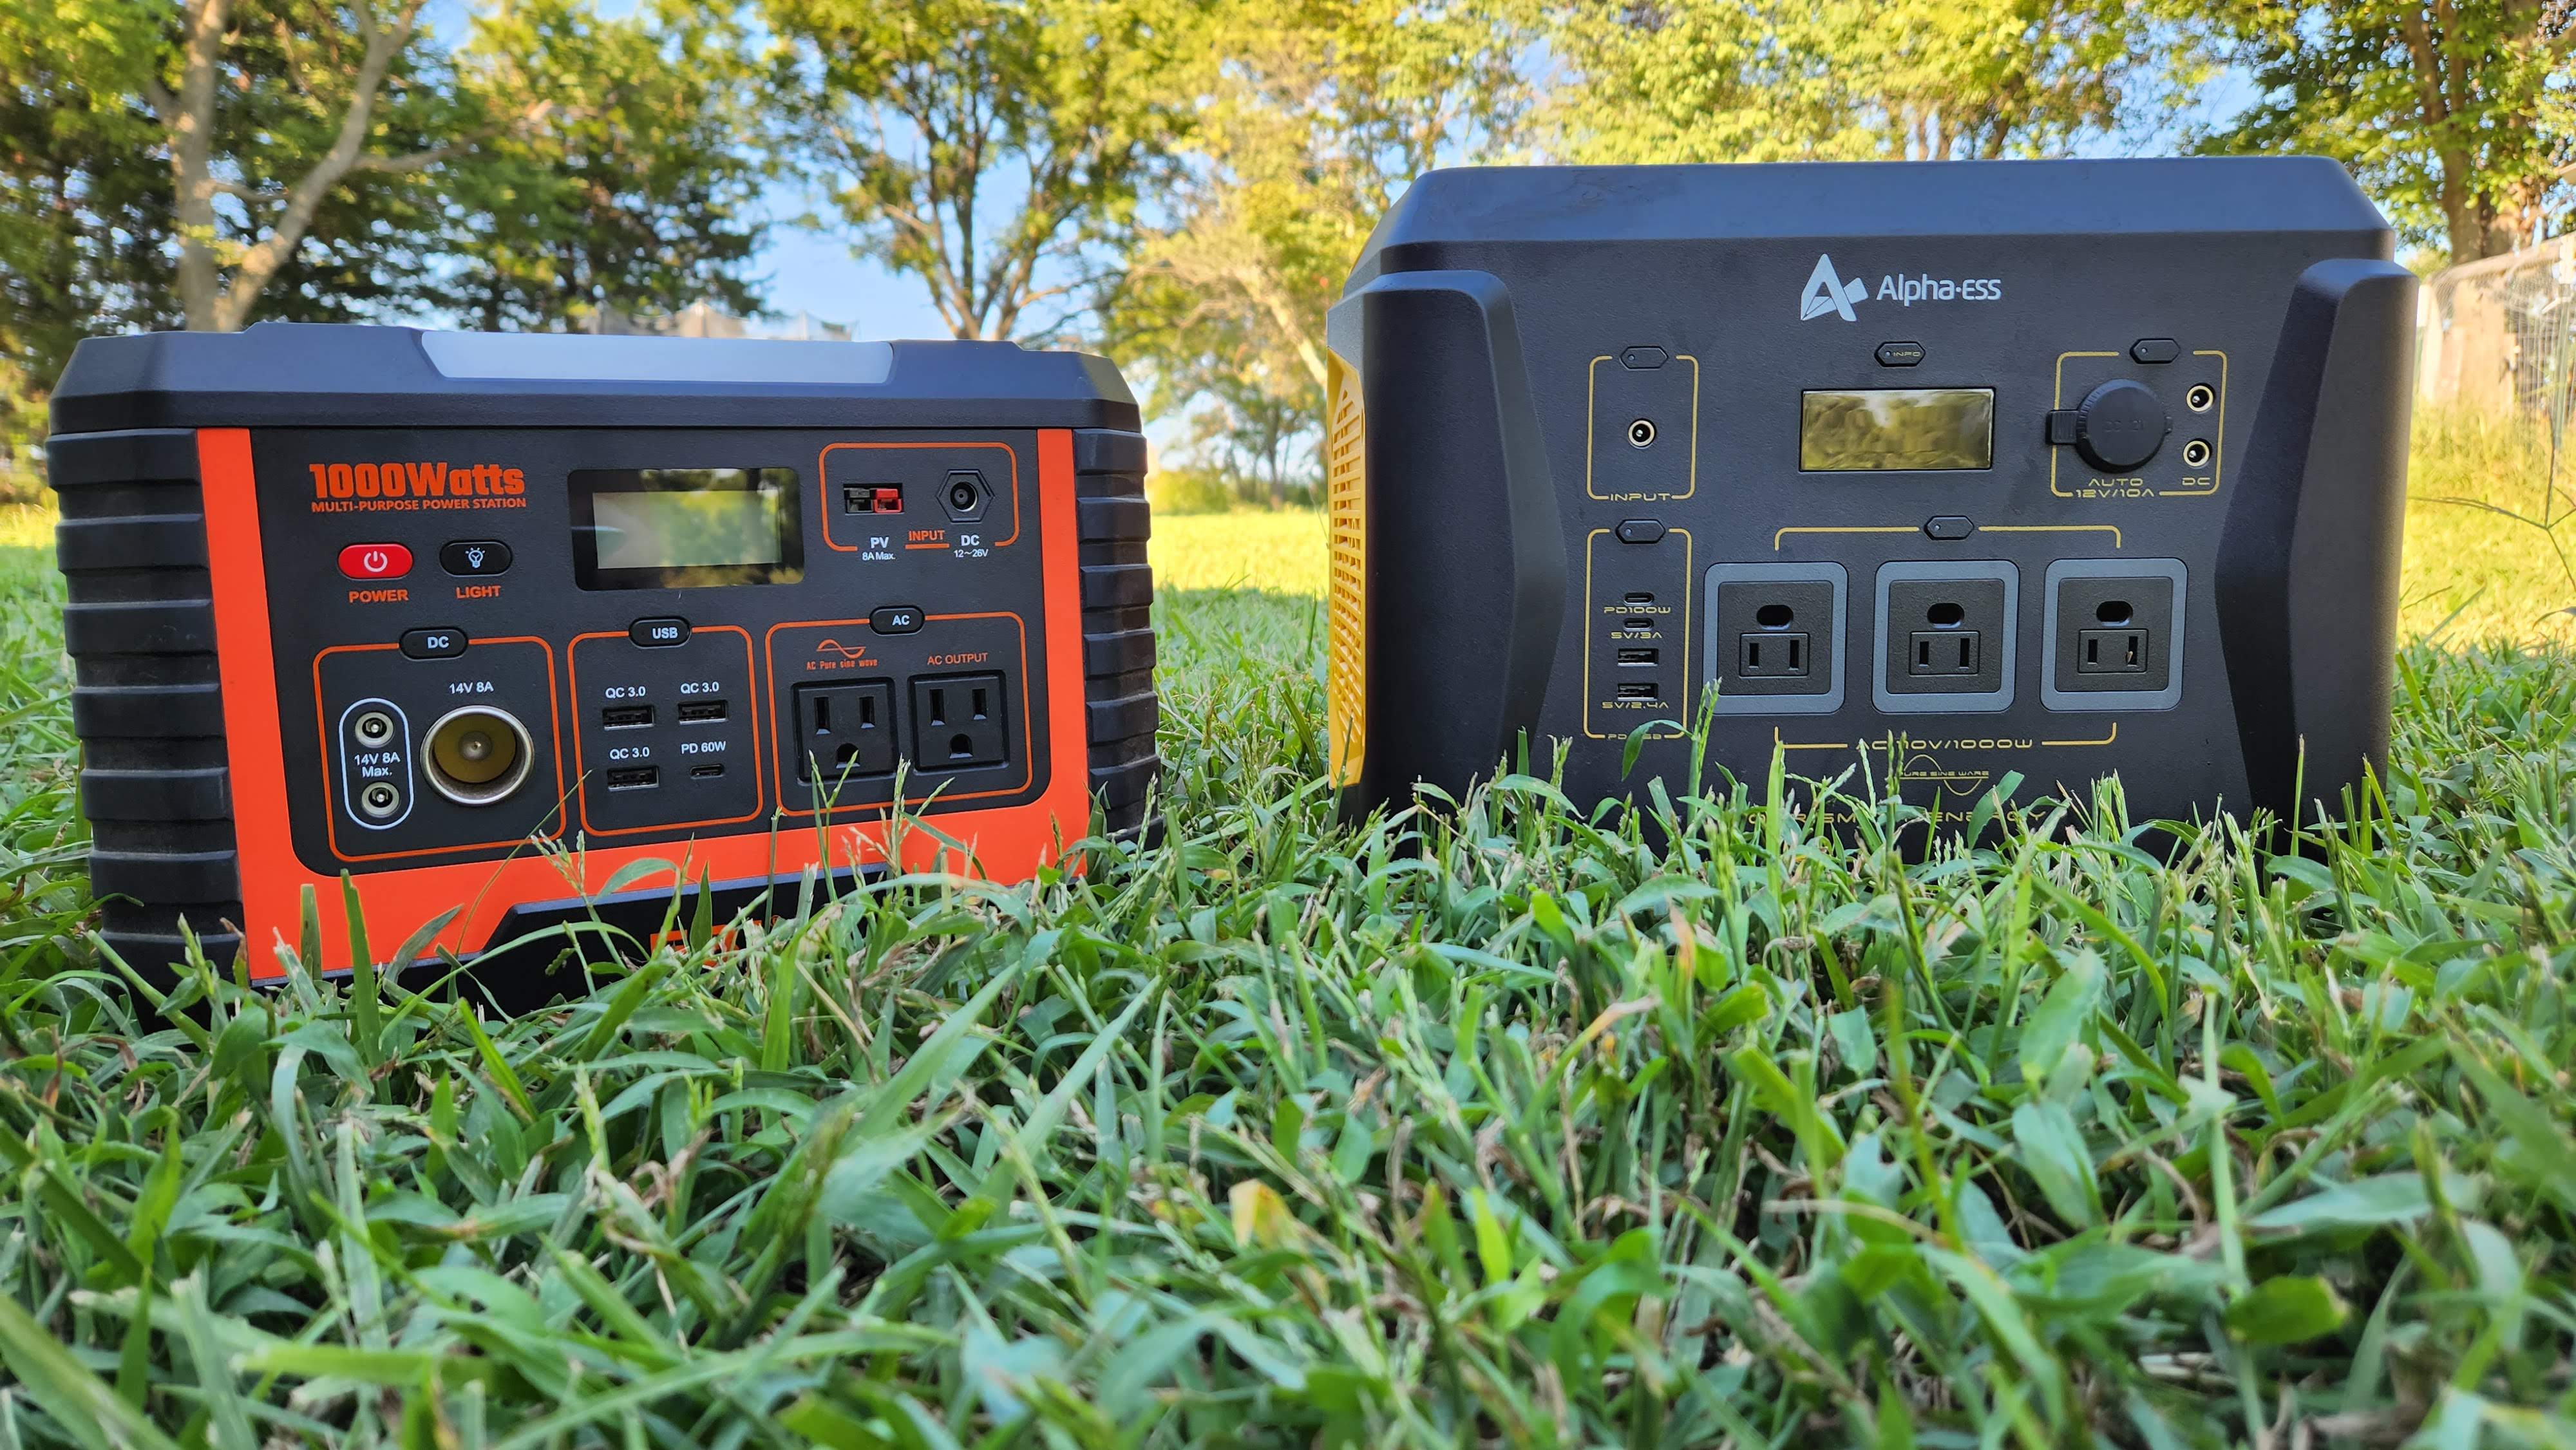 EBL Voyager 1000 and AlphaESS AP1000 power station